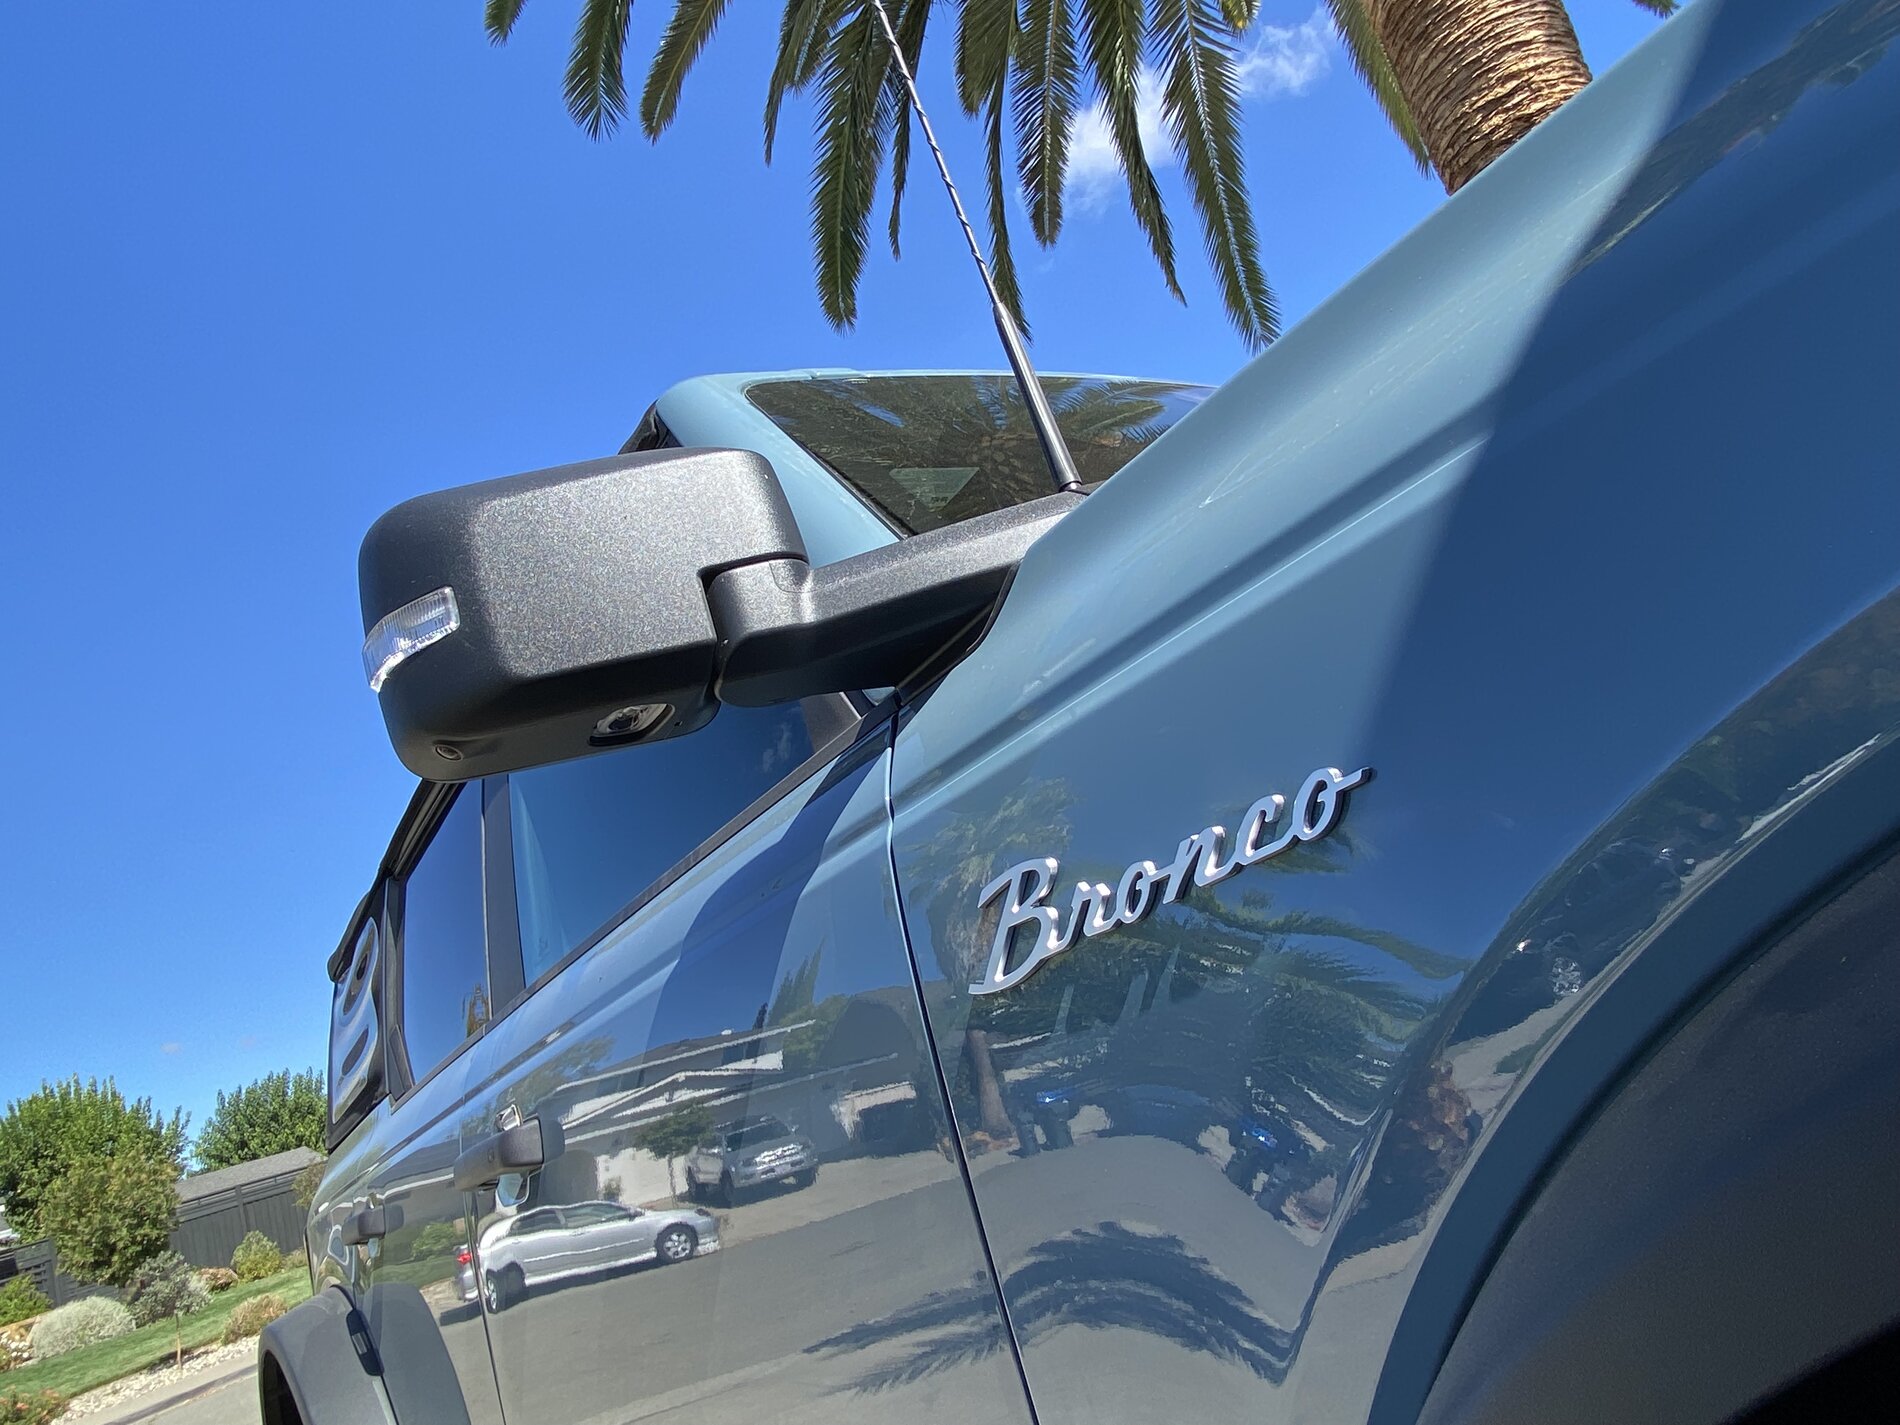 Ford Bronco New Bronco fender badge from Bronco Depot USA looks awesome IMG_20210418_162621